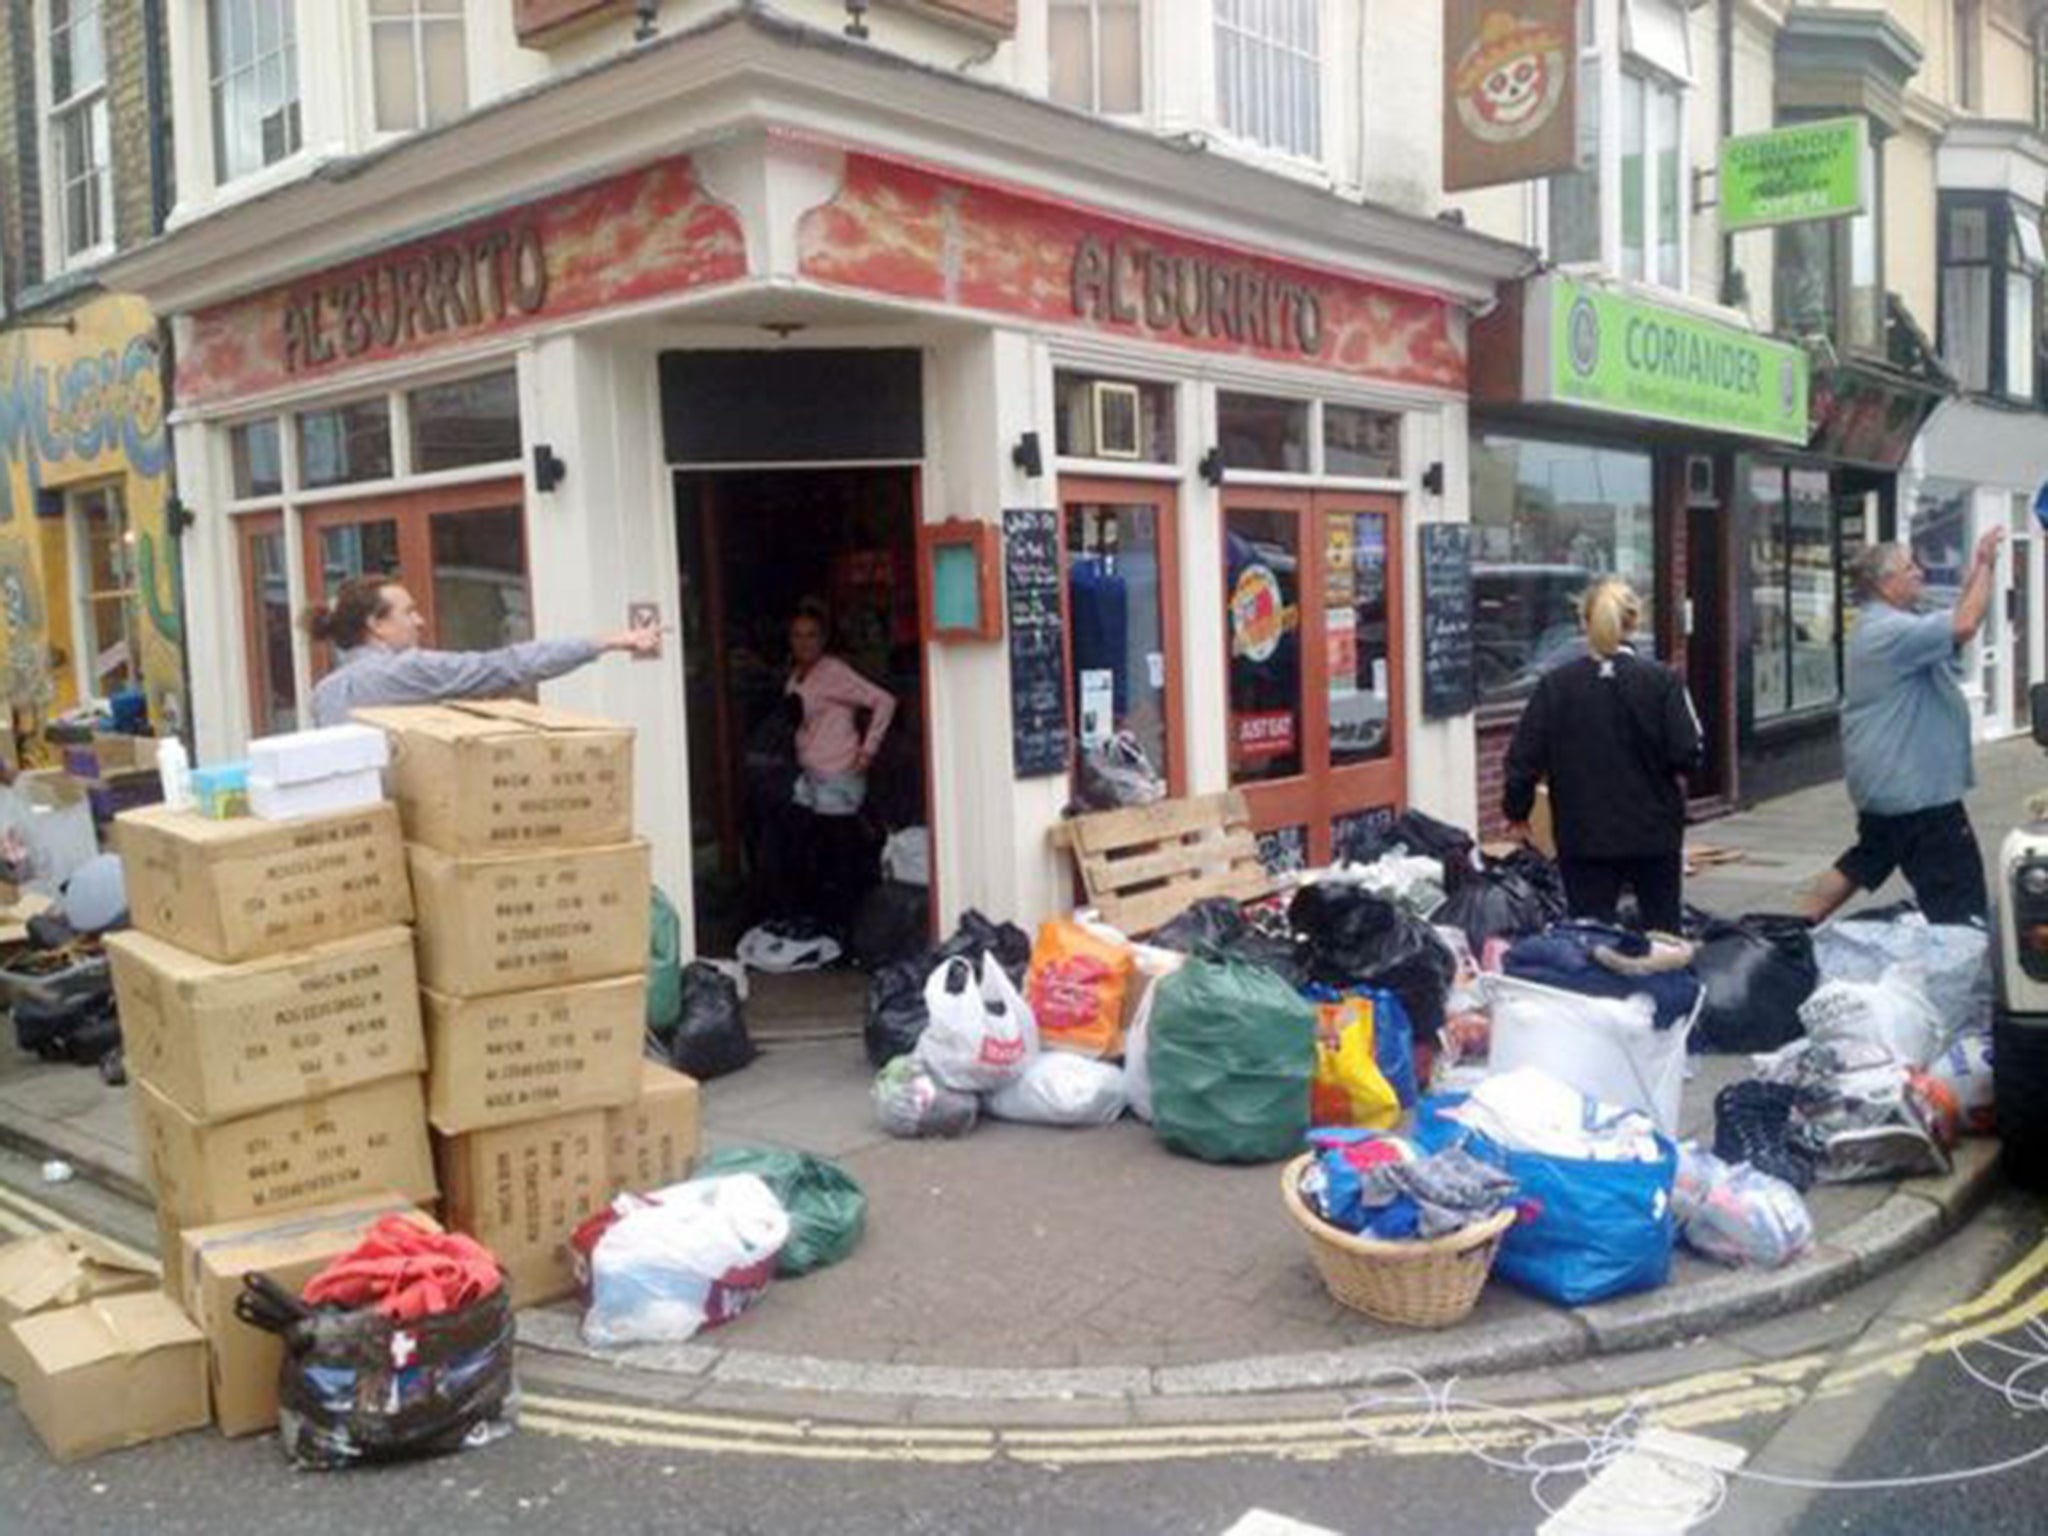 Staff and friends of the Alíburrito bar in Southsea, Portsmouth gathering supplies to take across to Calais